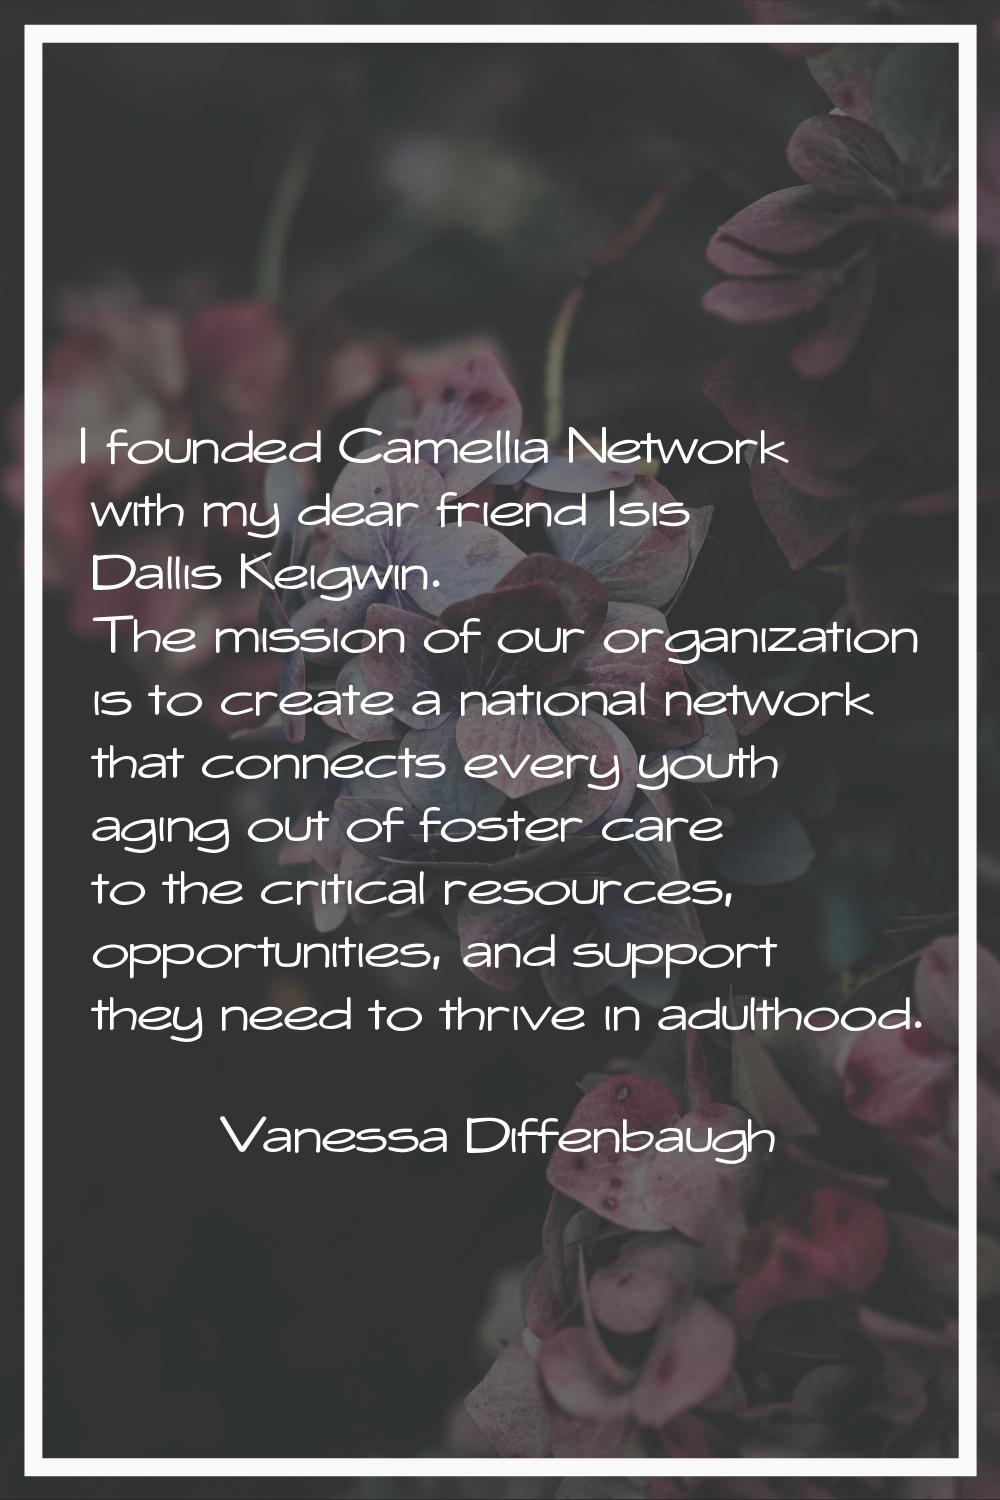 I founded Camellia Network with my dear friend Isis Dallis Keigwin. The mission of our organization